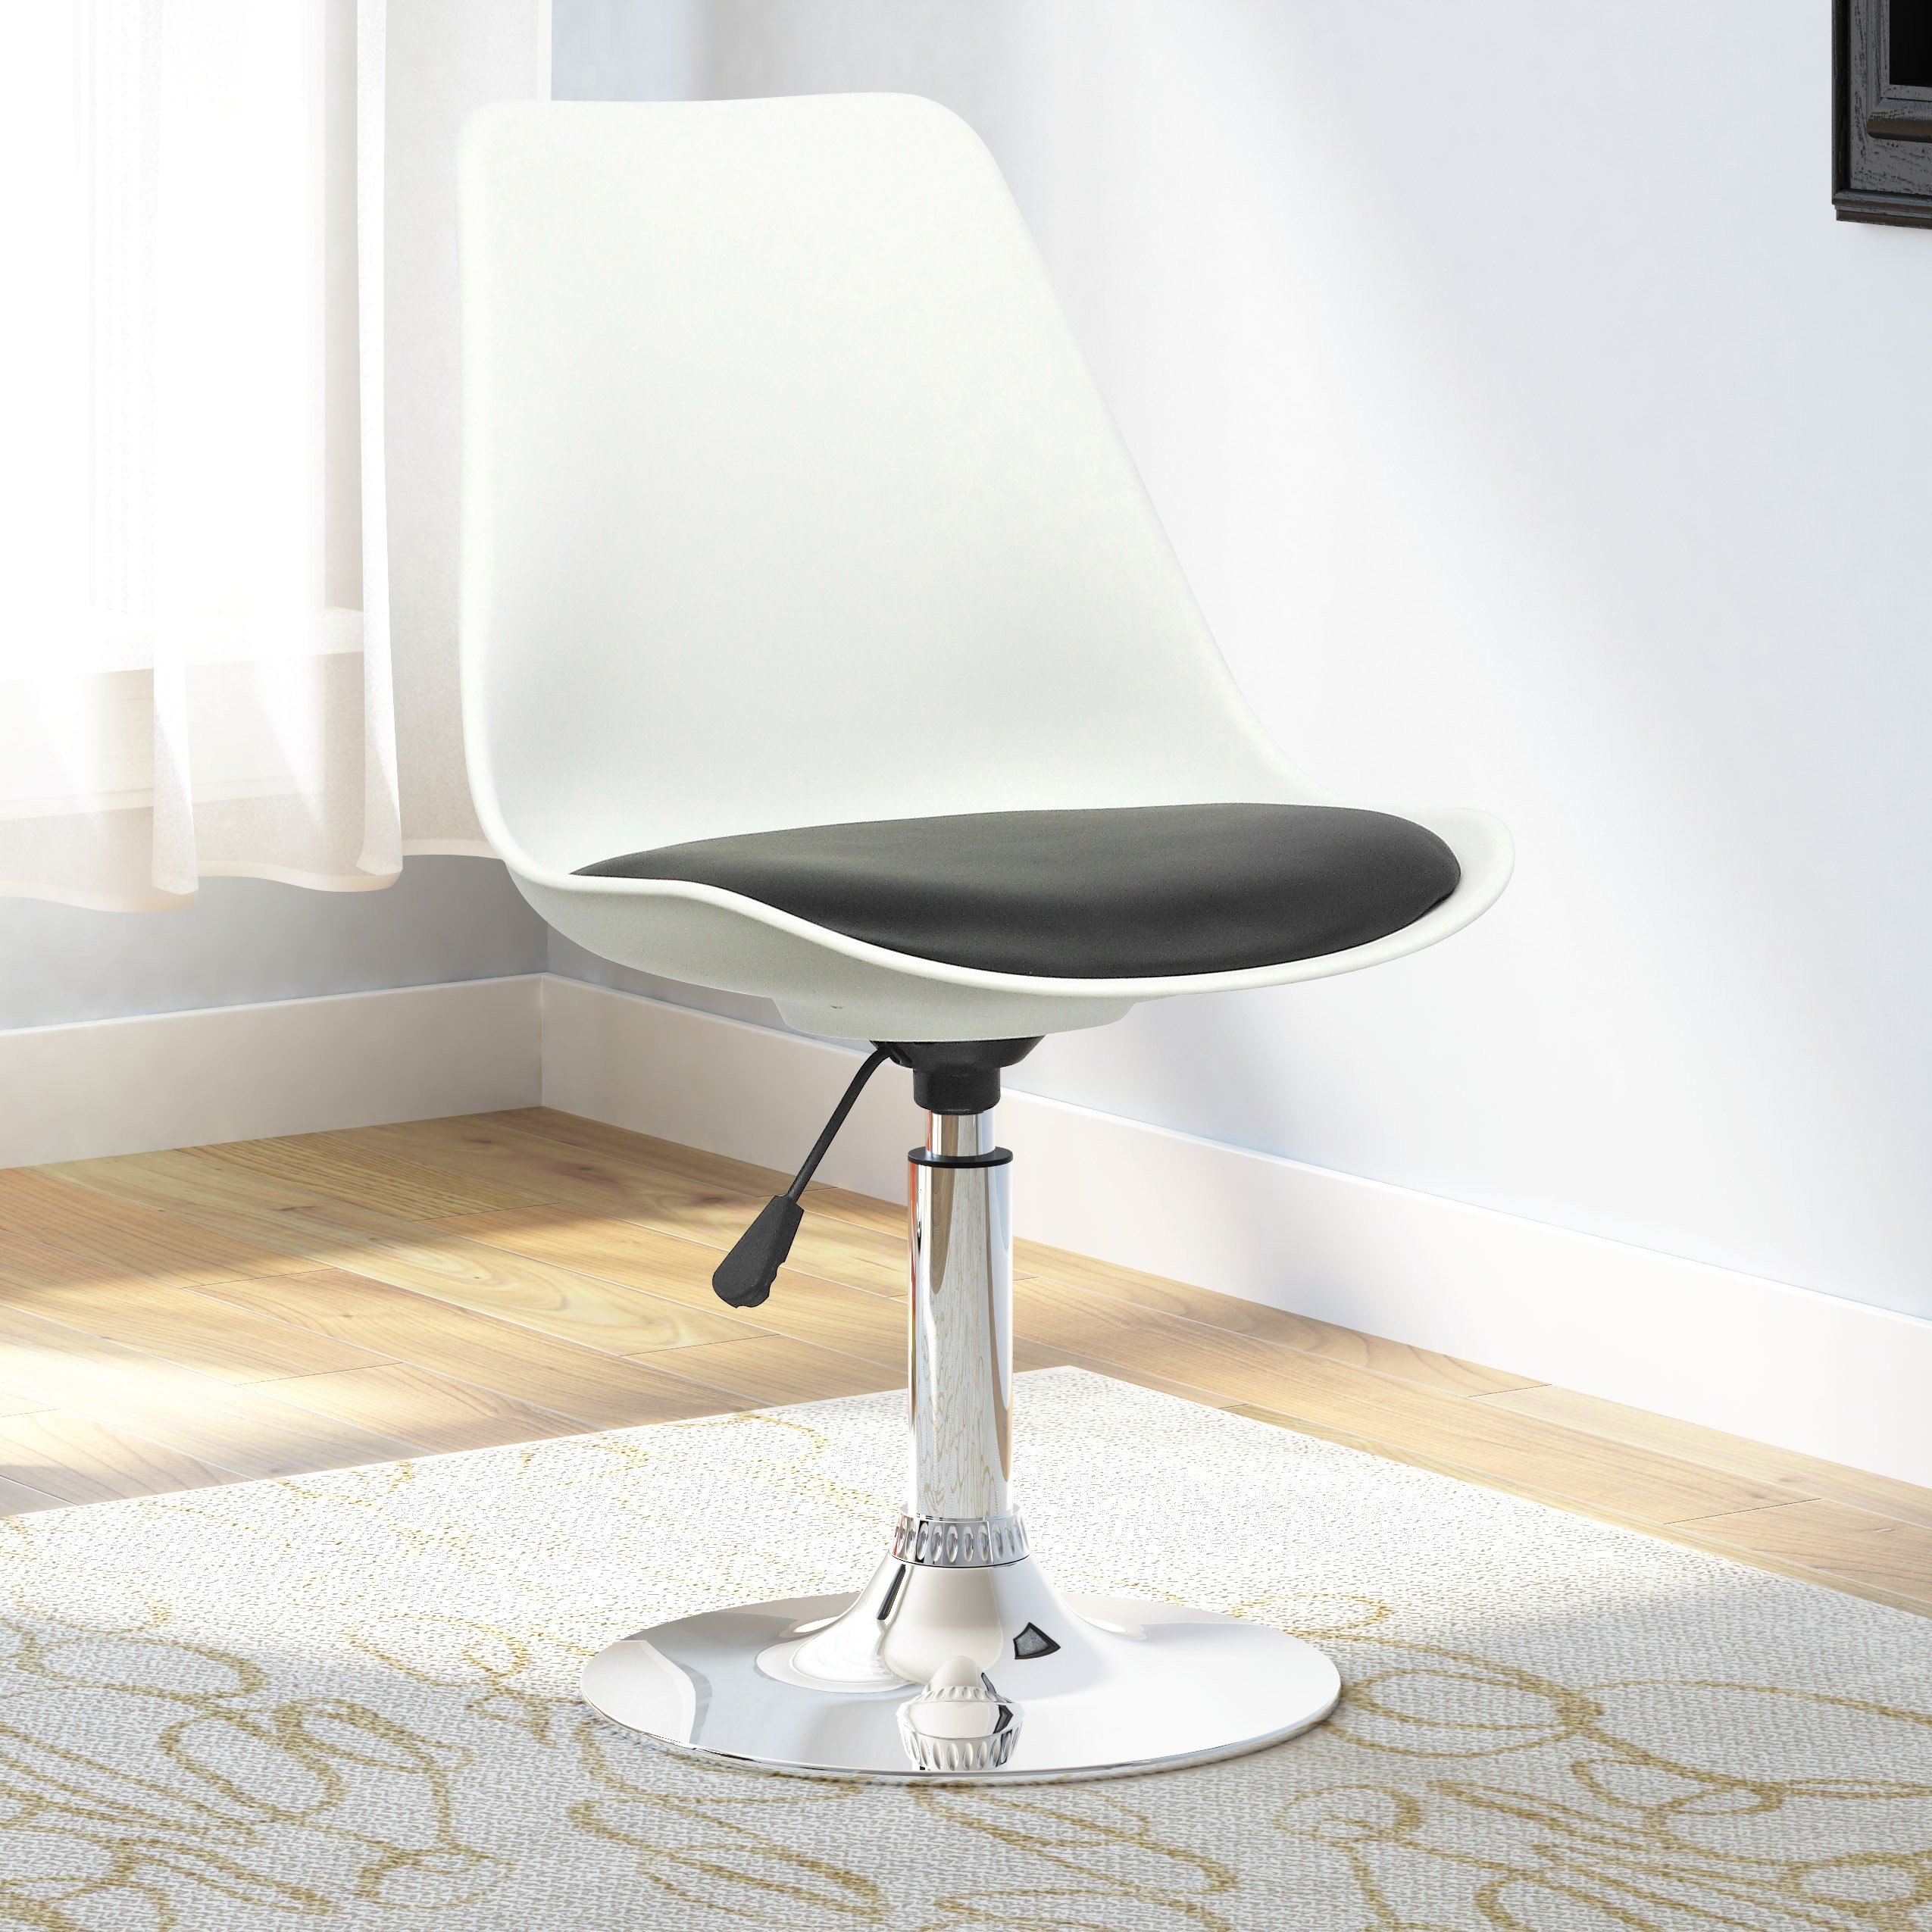 CorLiving DAB-200-C Adjustable Leatherette Seat Chair, White with Black, Set of 2